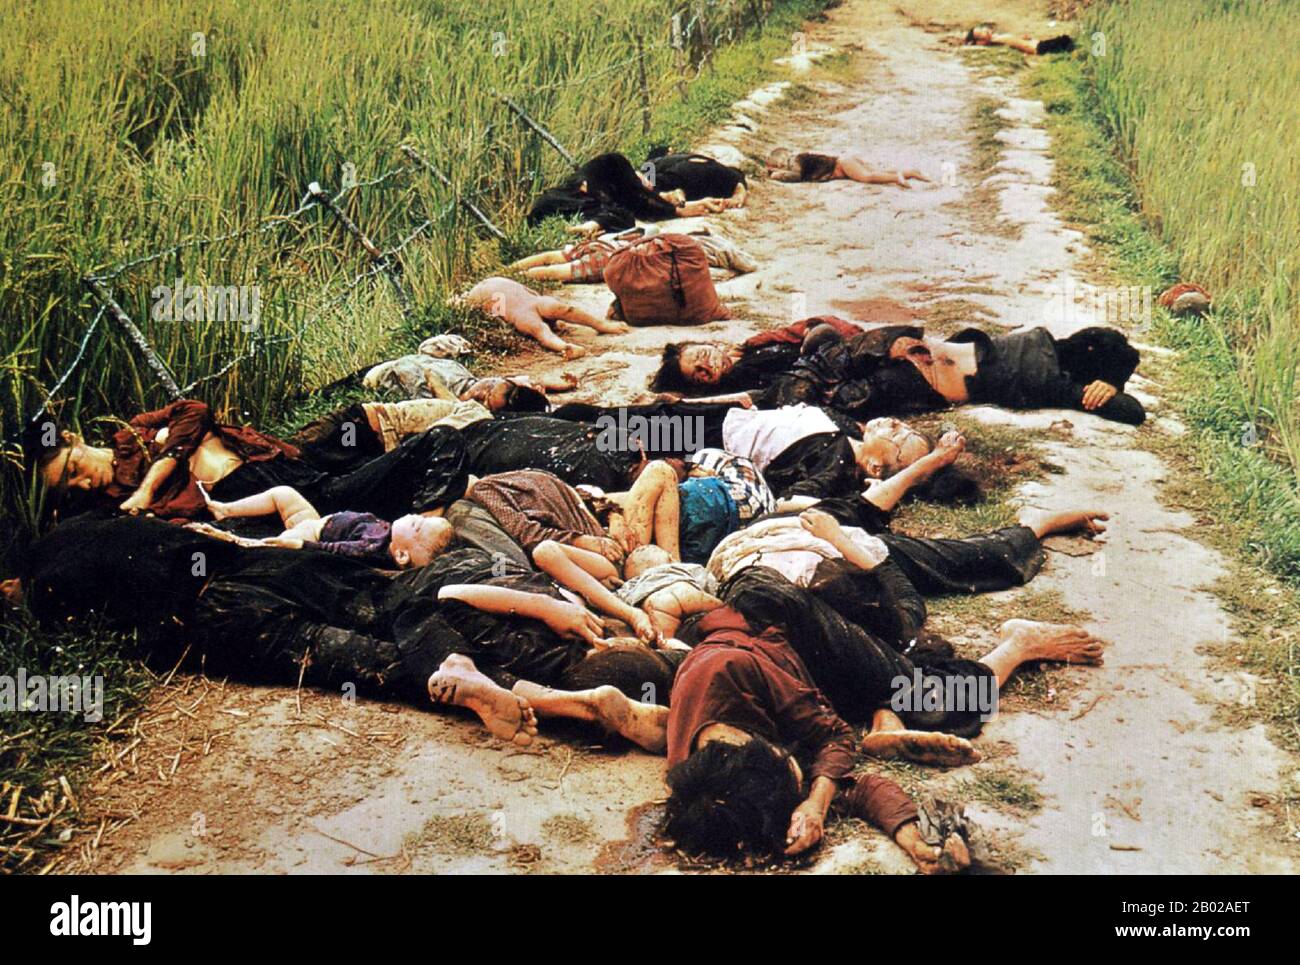 The My Lai Massacre was the Vietnam War mass murder of 347–504 unarmed civilians in South Vietnam on March 16, 1968, by United States Army soldiers of 'Charlie' Company of 1st Battalion, 20th Infantry Regiment, 11th Brigade of the Americal Division.  Most of the victims were women, children (including babies), and elderly people. Many were raped, beaten, and tortured, and some of the bodies were later found to be mutilated. While 26 US soldiers were initially charged with criminal offenses for their actions at Mỹ Lai, only Second Lieutenant William Calley, a platoon leader in Charlie Company, Stock Photo